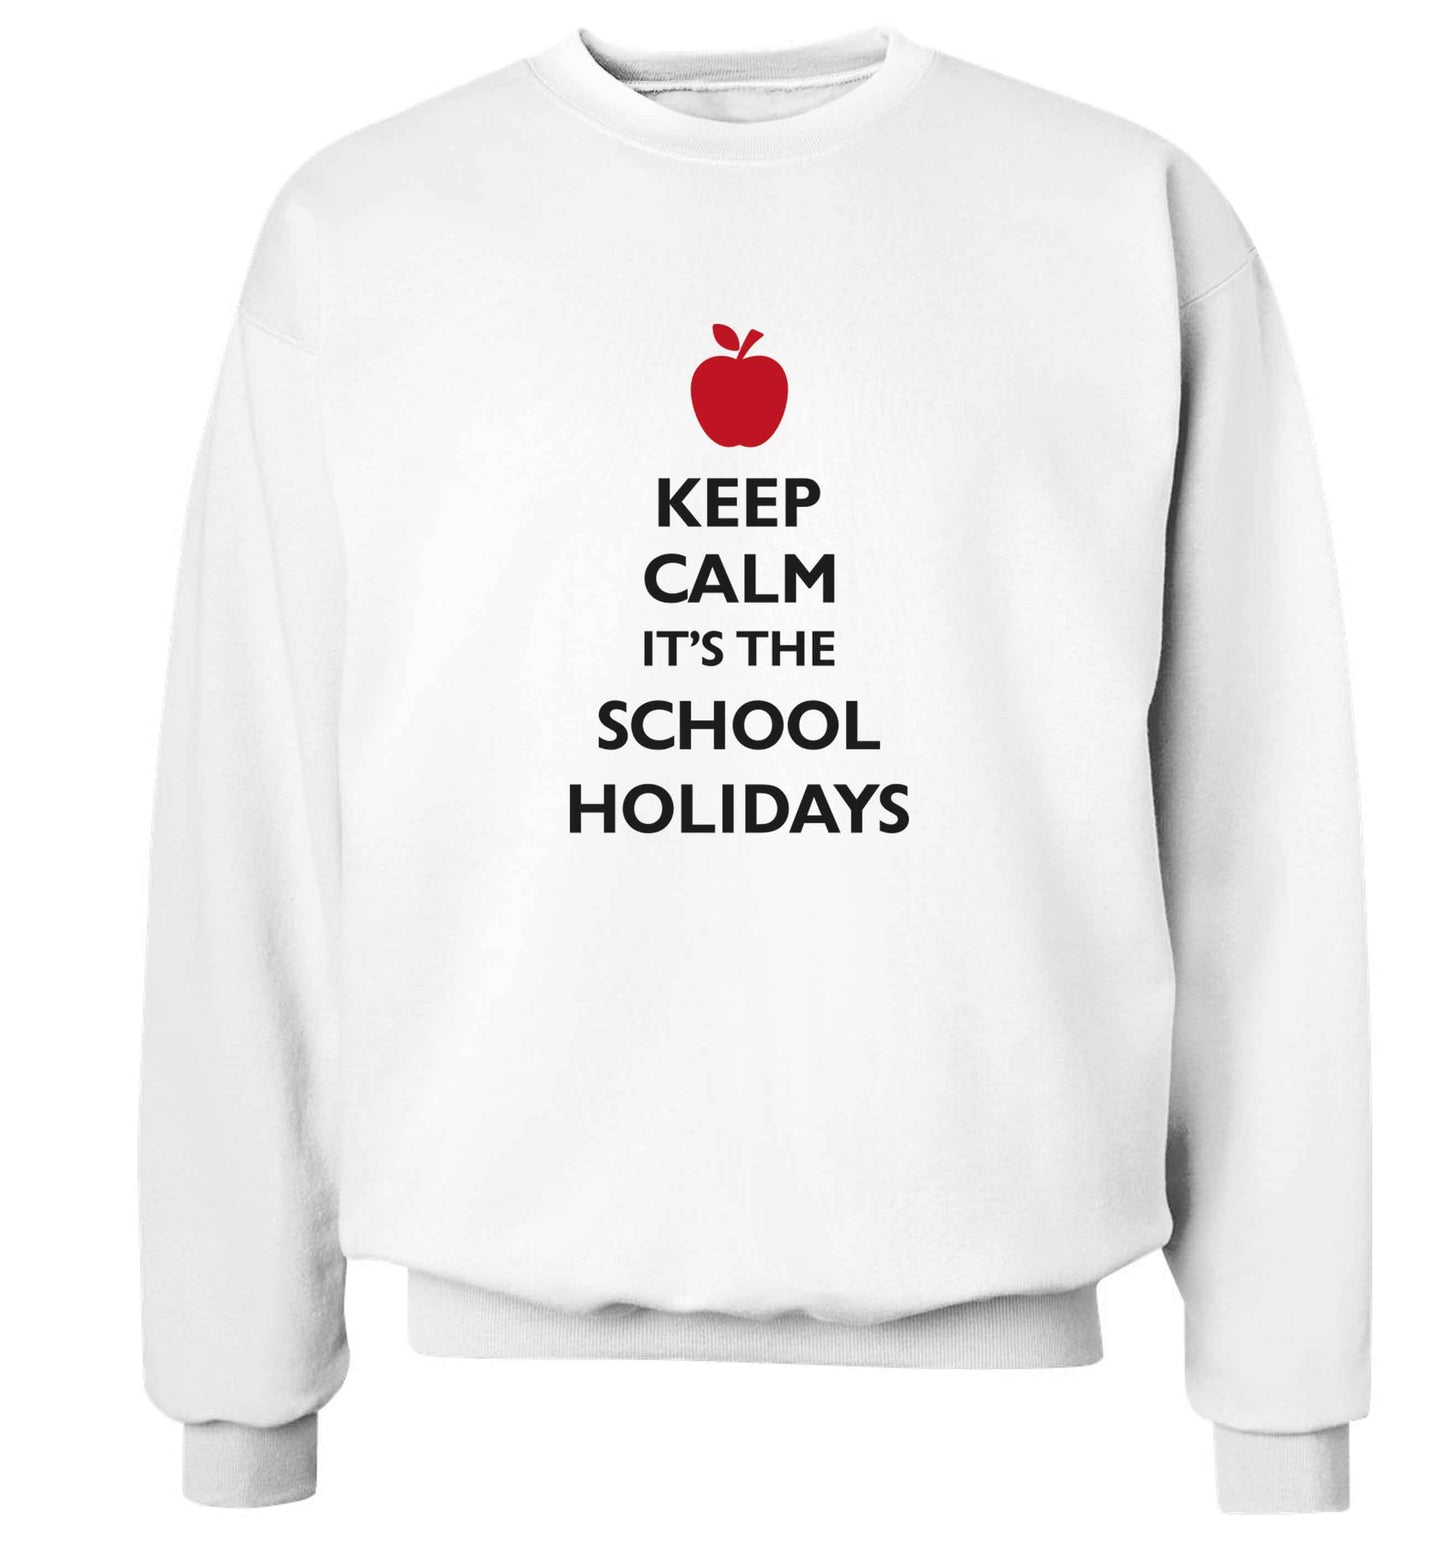 Keep calm it's the school holidays adult's unisex white sweater 2XL